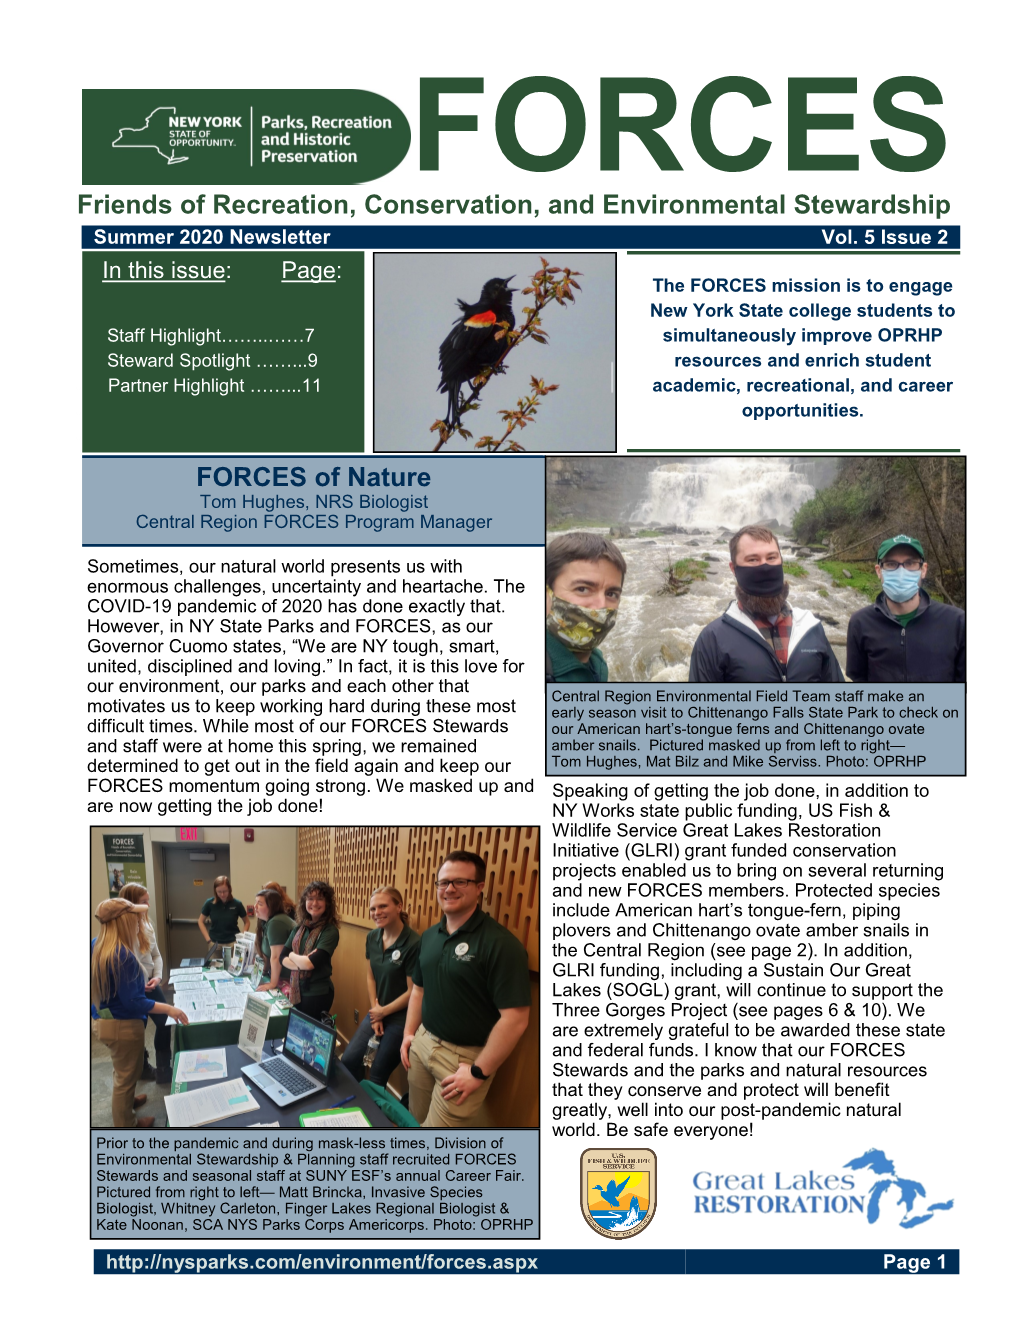 FORCES Friends of Recreation, Conservation, and Environmental Stewardship Summer 2020 Newsletter Vol